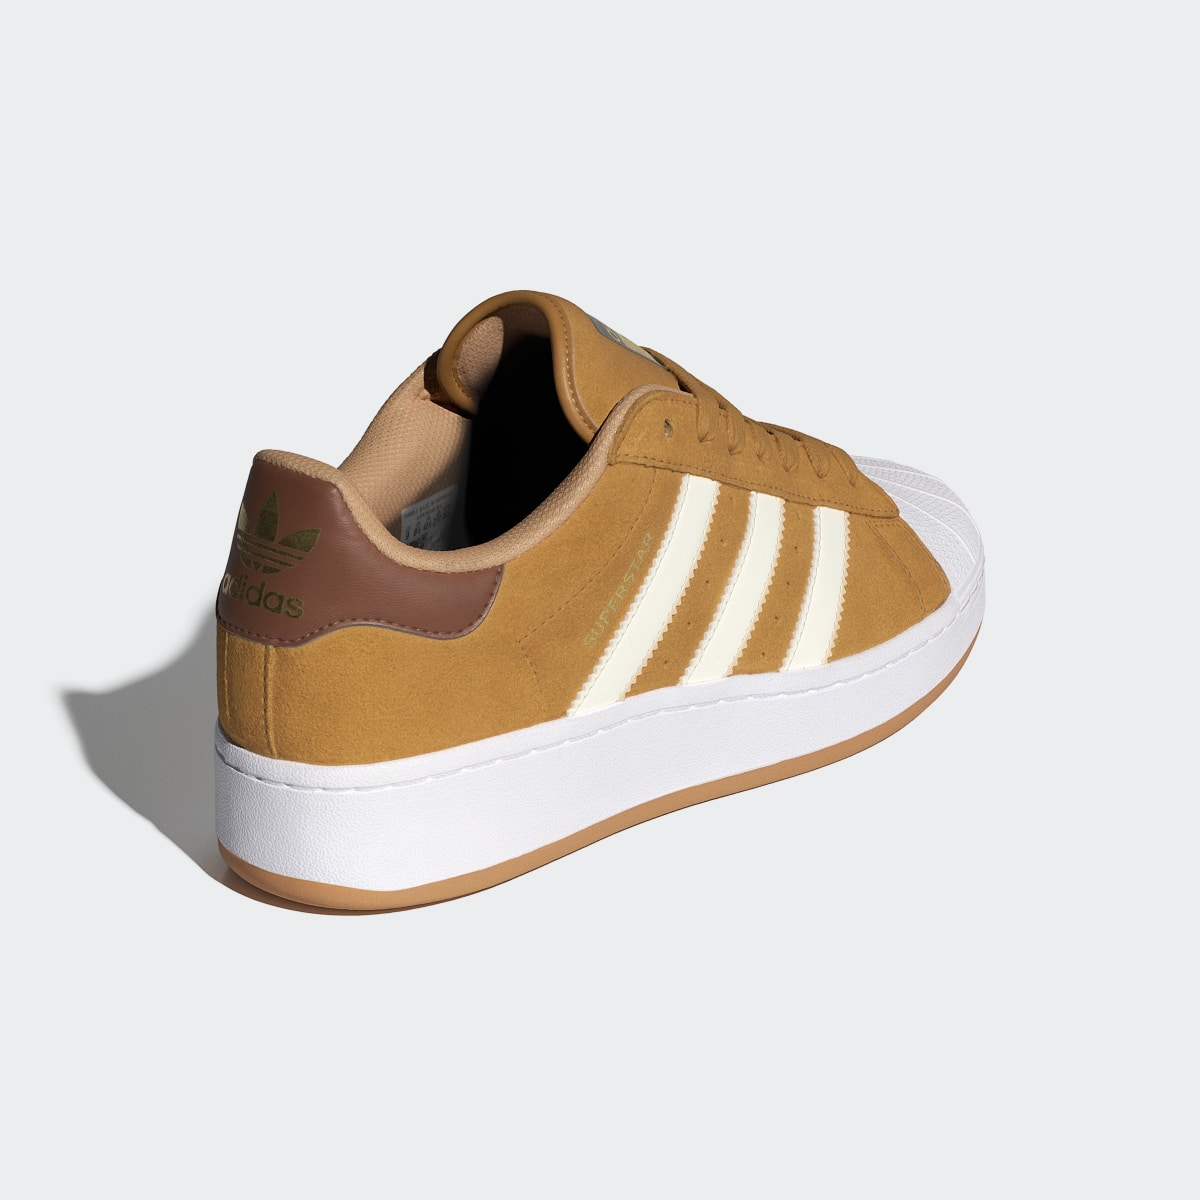 Adidas Superstar XLG Shoes. 5